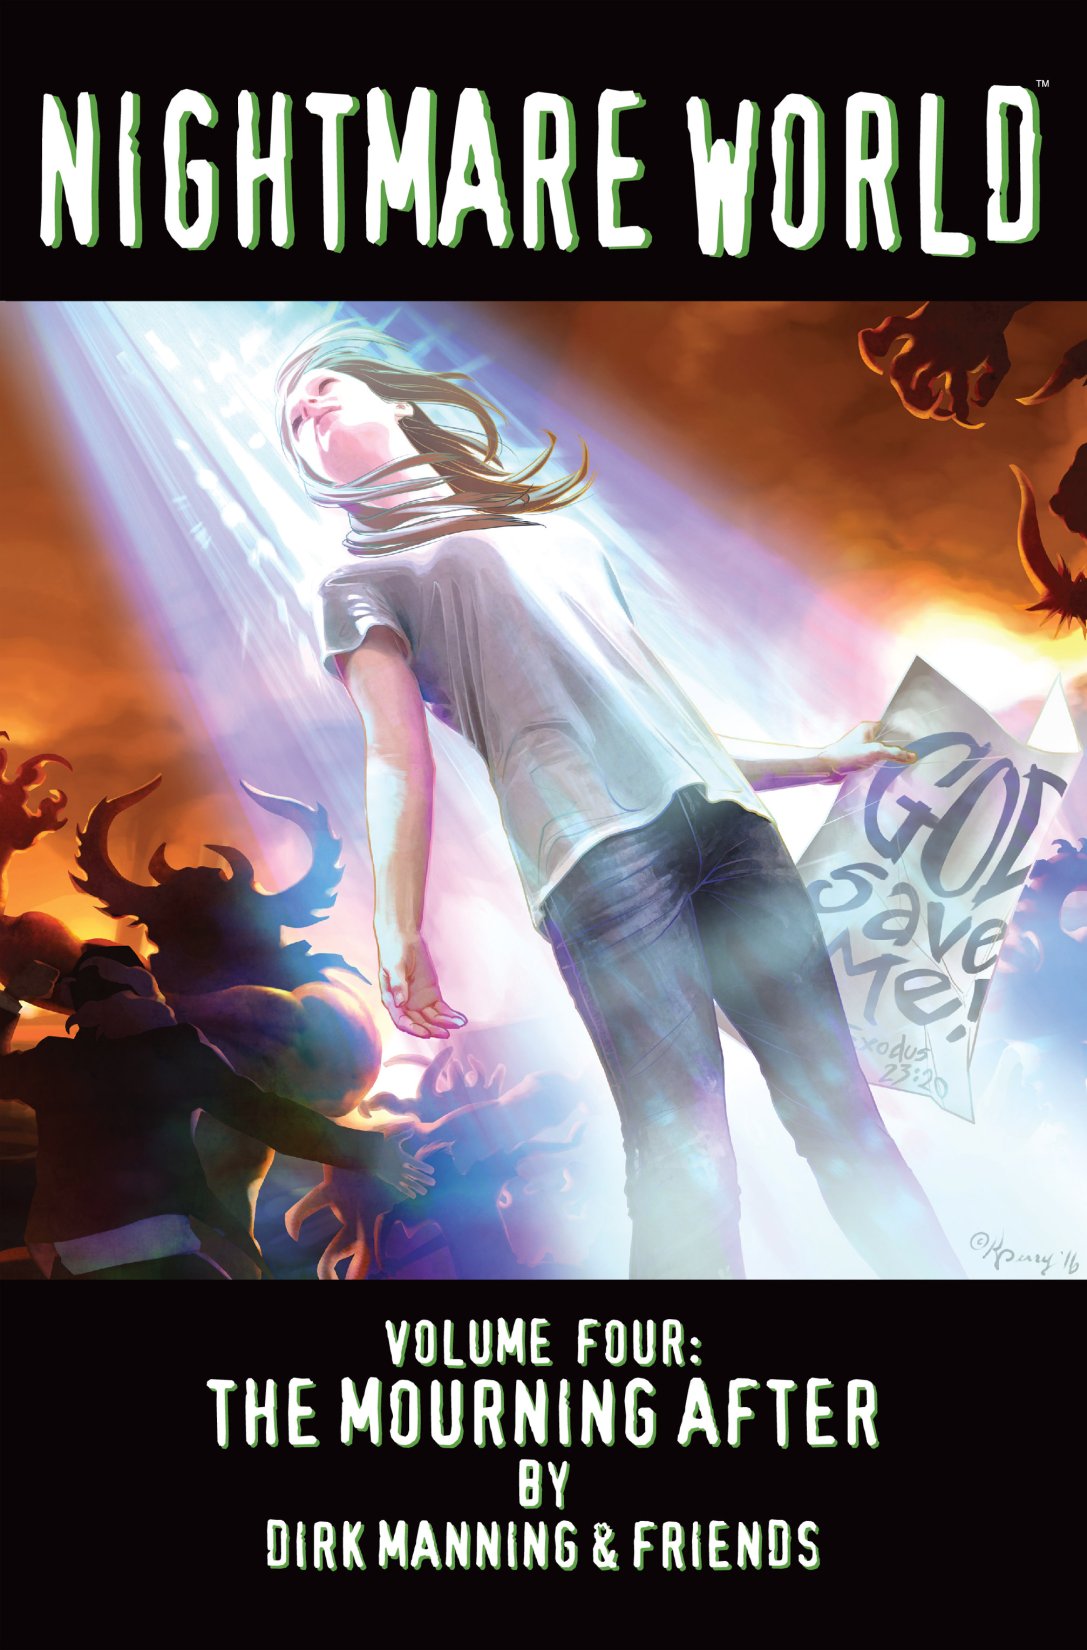 Read online Nightmare World comic -  Issue # Vol. 4 The Mourning After - 1